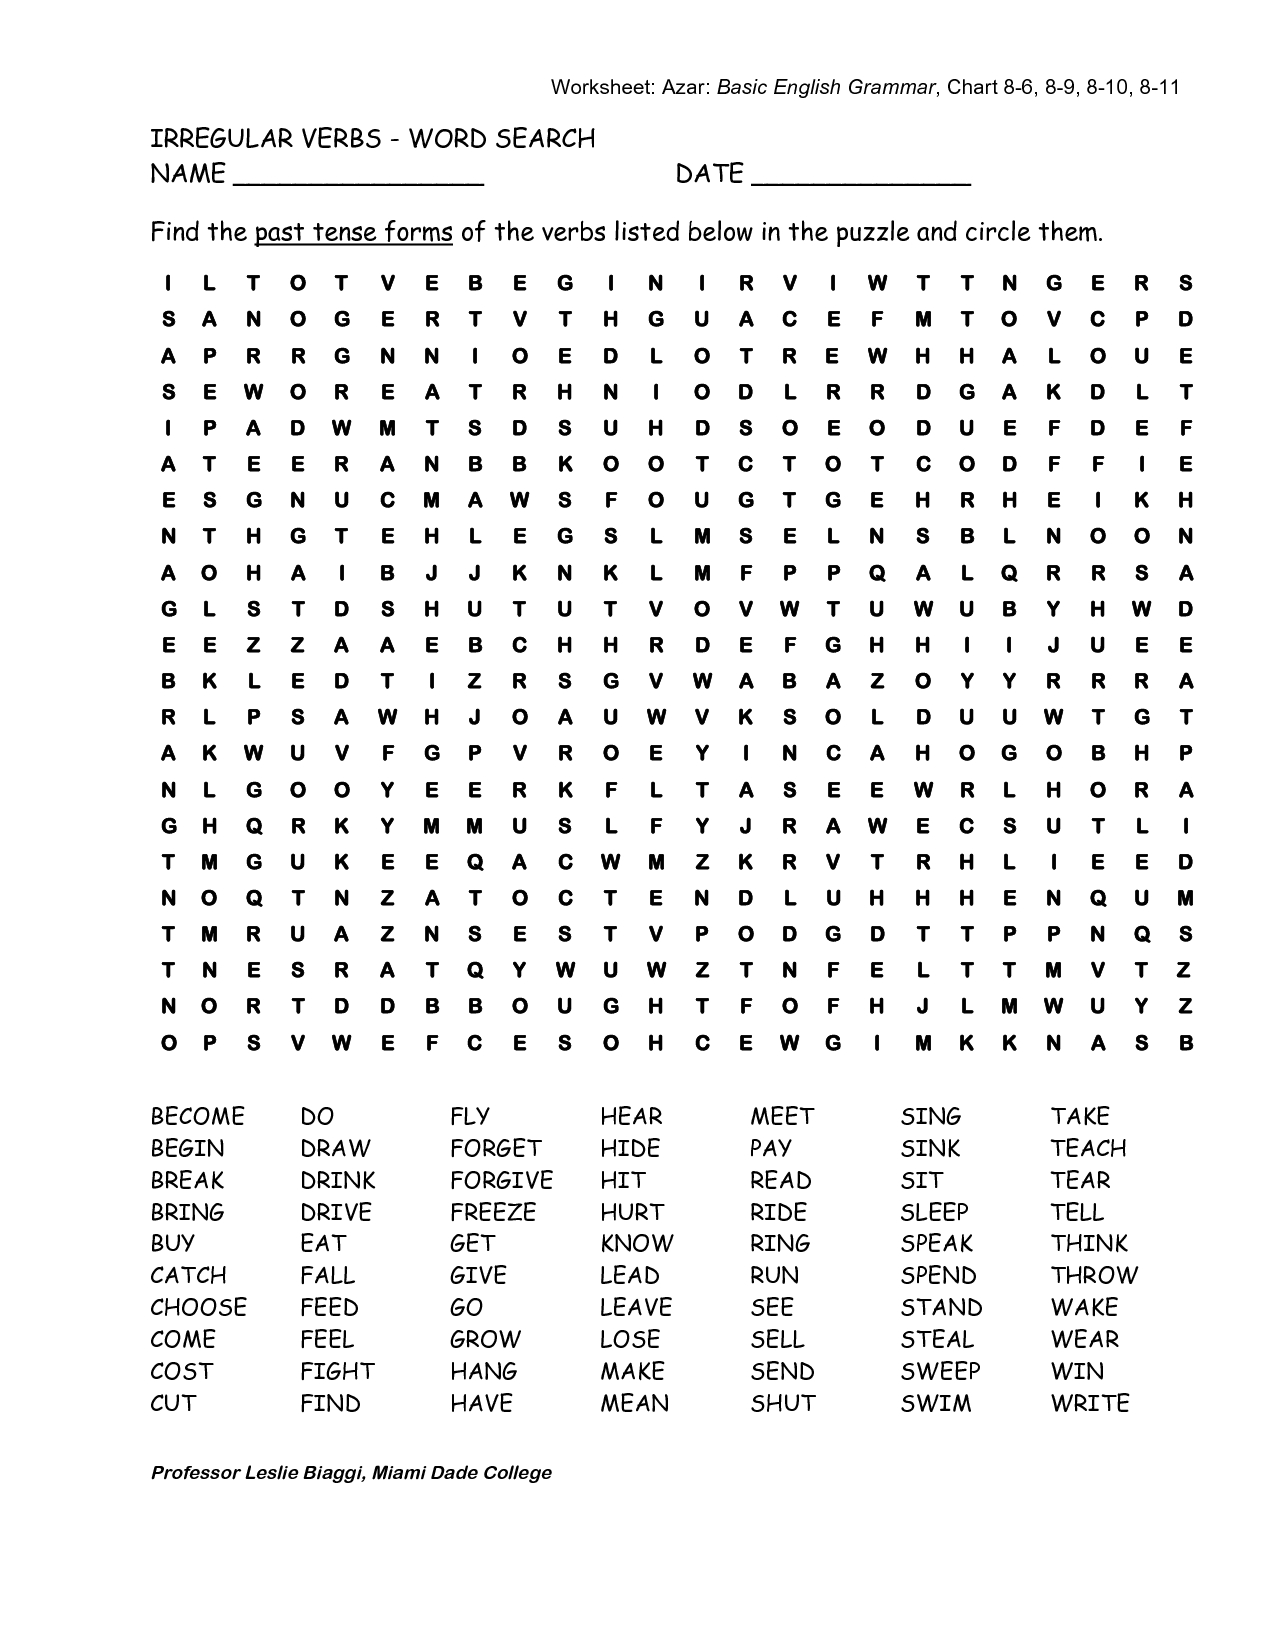 Free Printable Word Search Puzzles | Word Puzzles | Third Grade-Word - Printable Crossword Puzzles On Anger Management